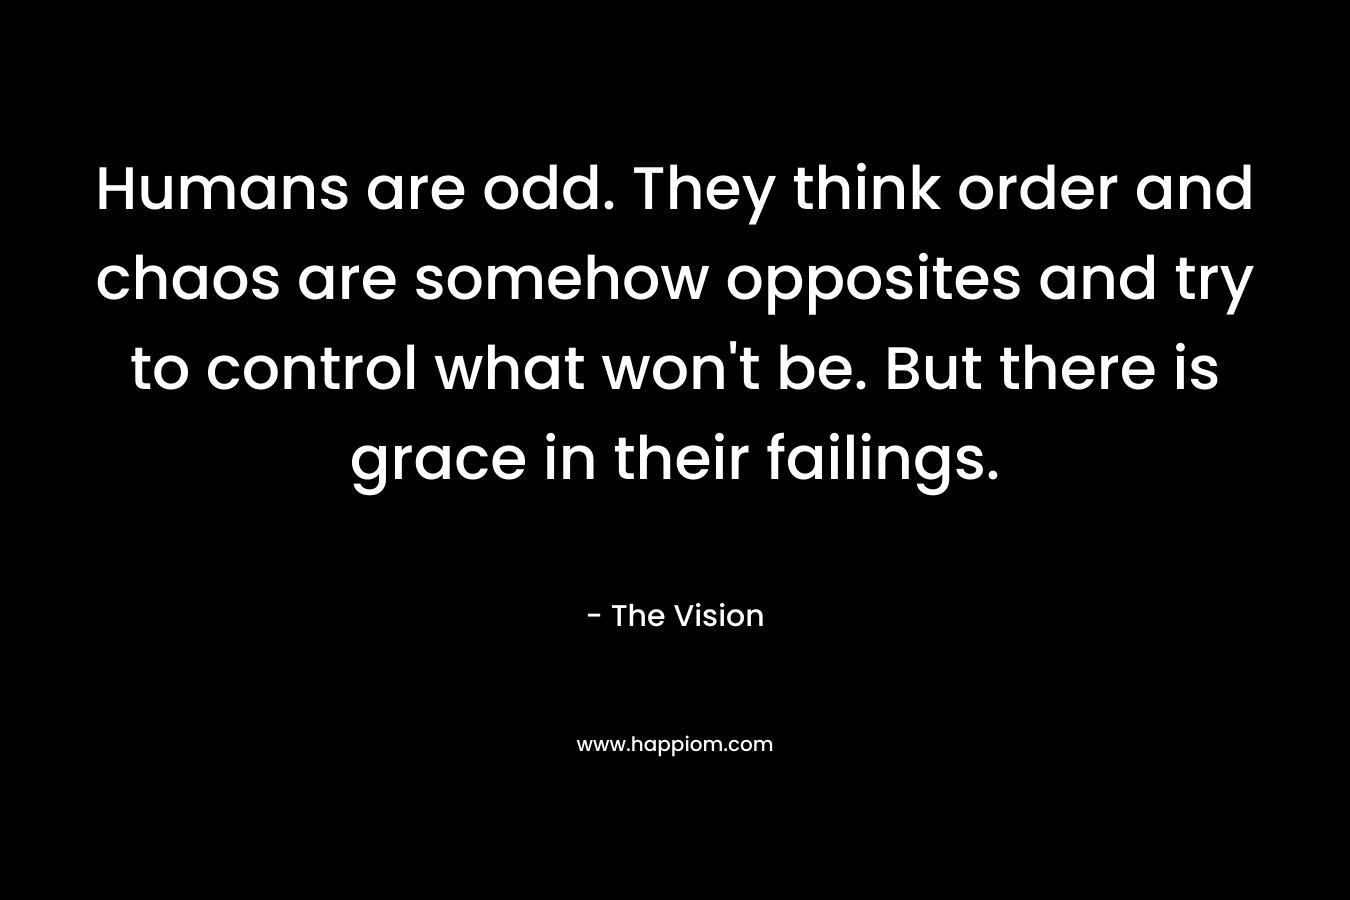 Humans are odd. They think order and chaos are somehow opposites and try to control what won’t be. But there is grace in their failings. – The Vision